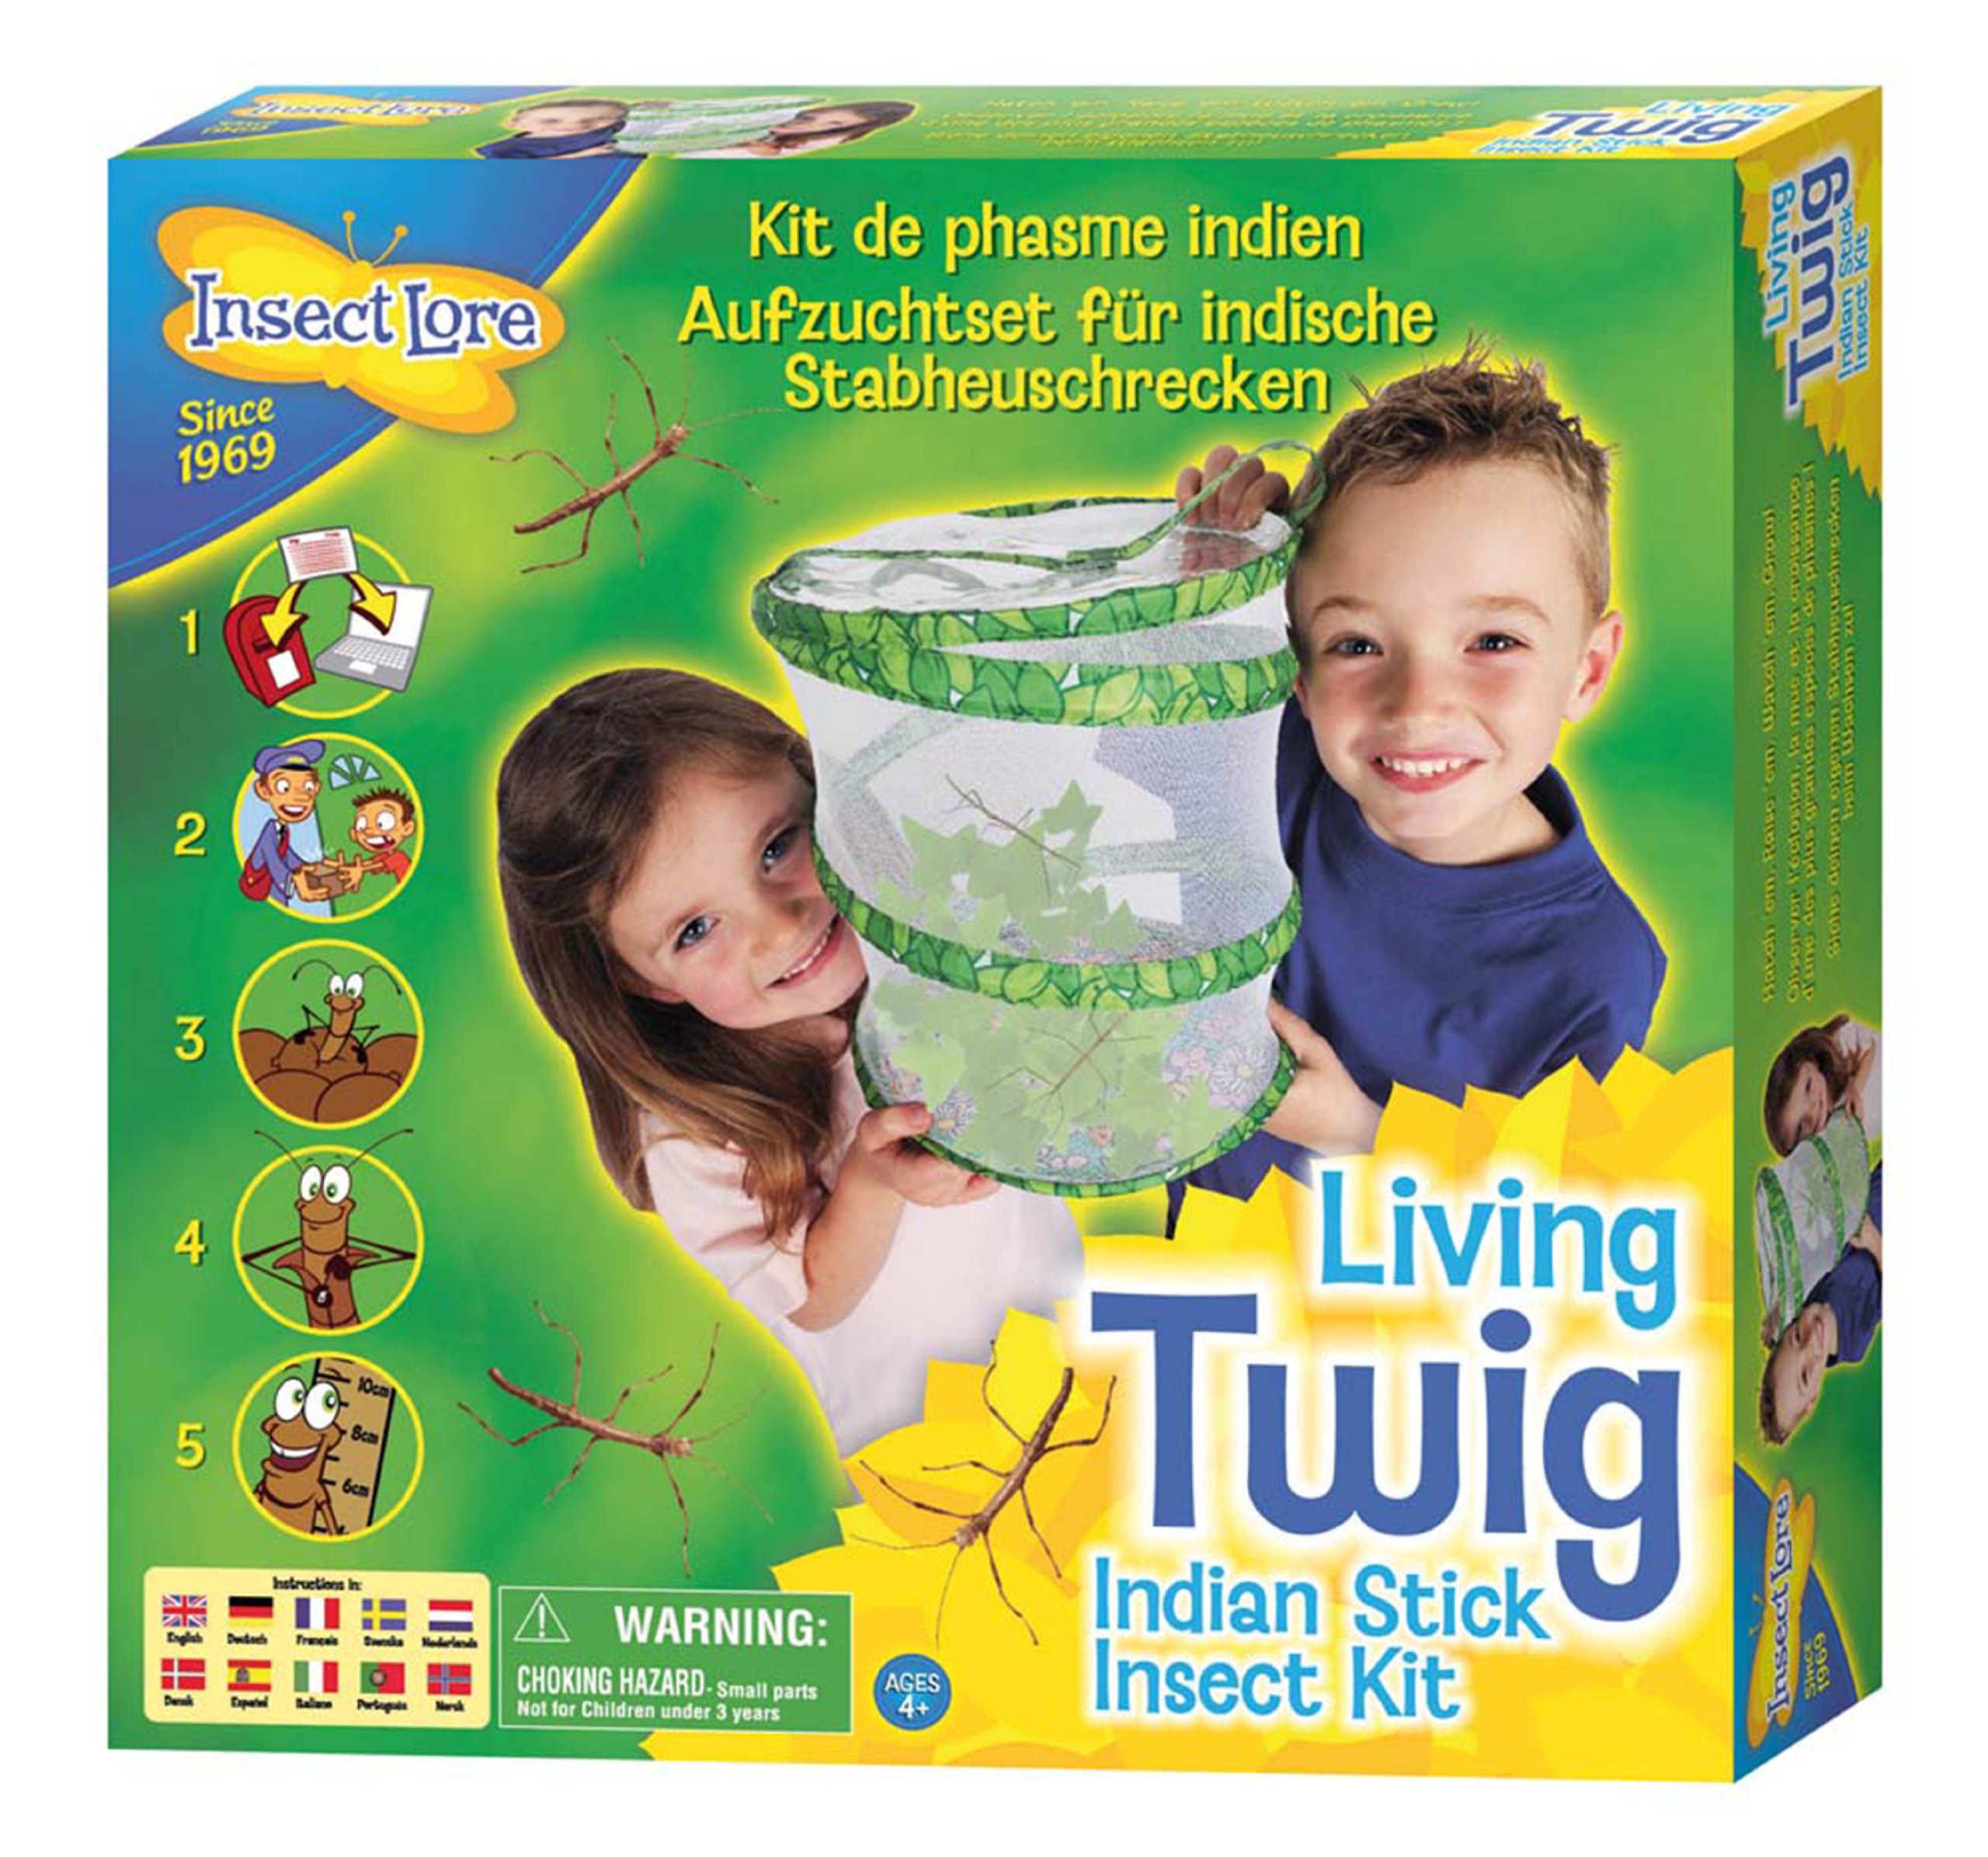 Insect Lore Stick Insect Kit